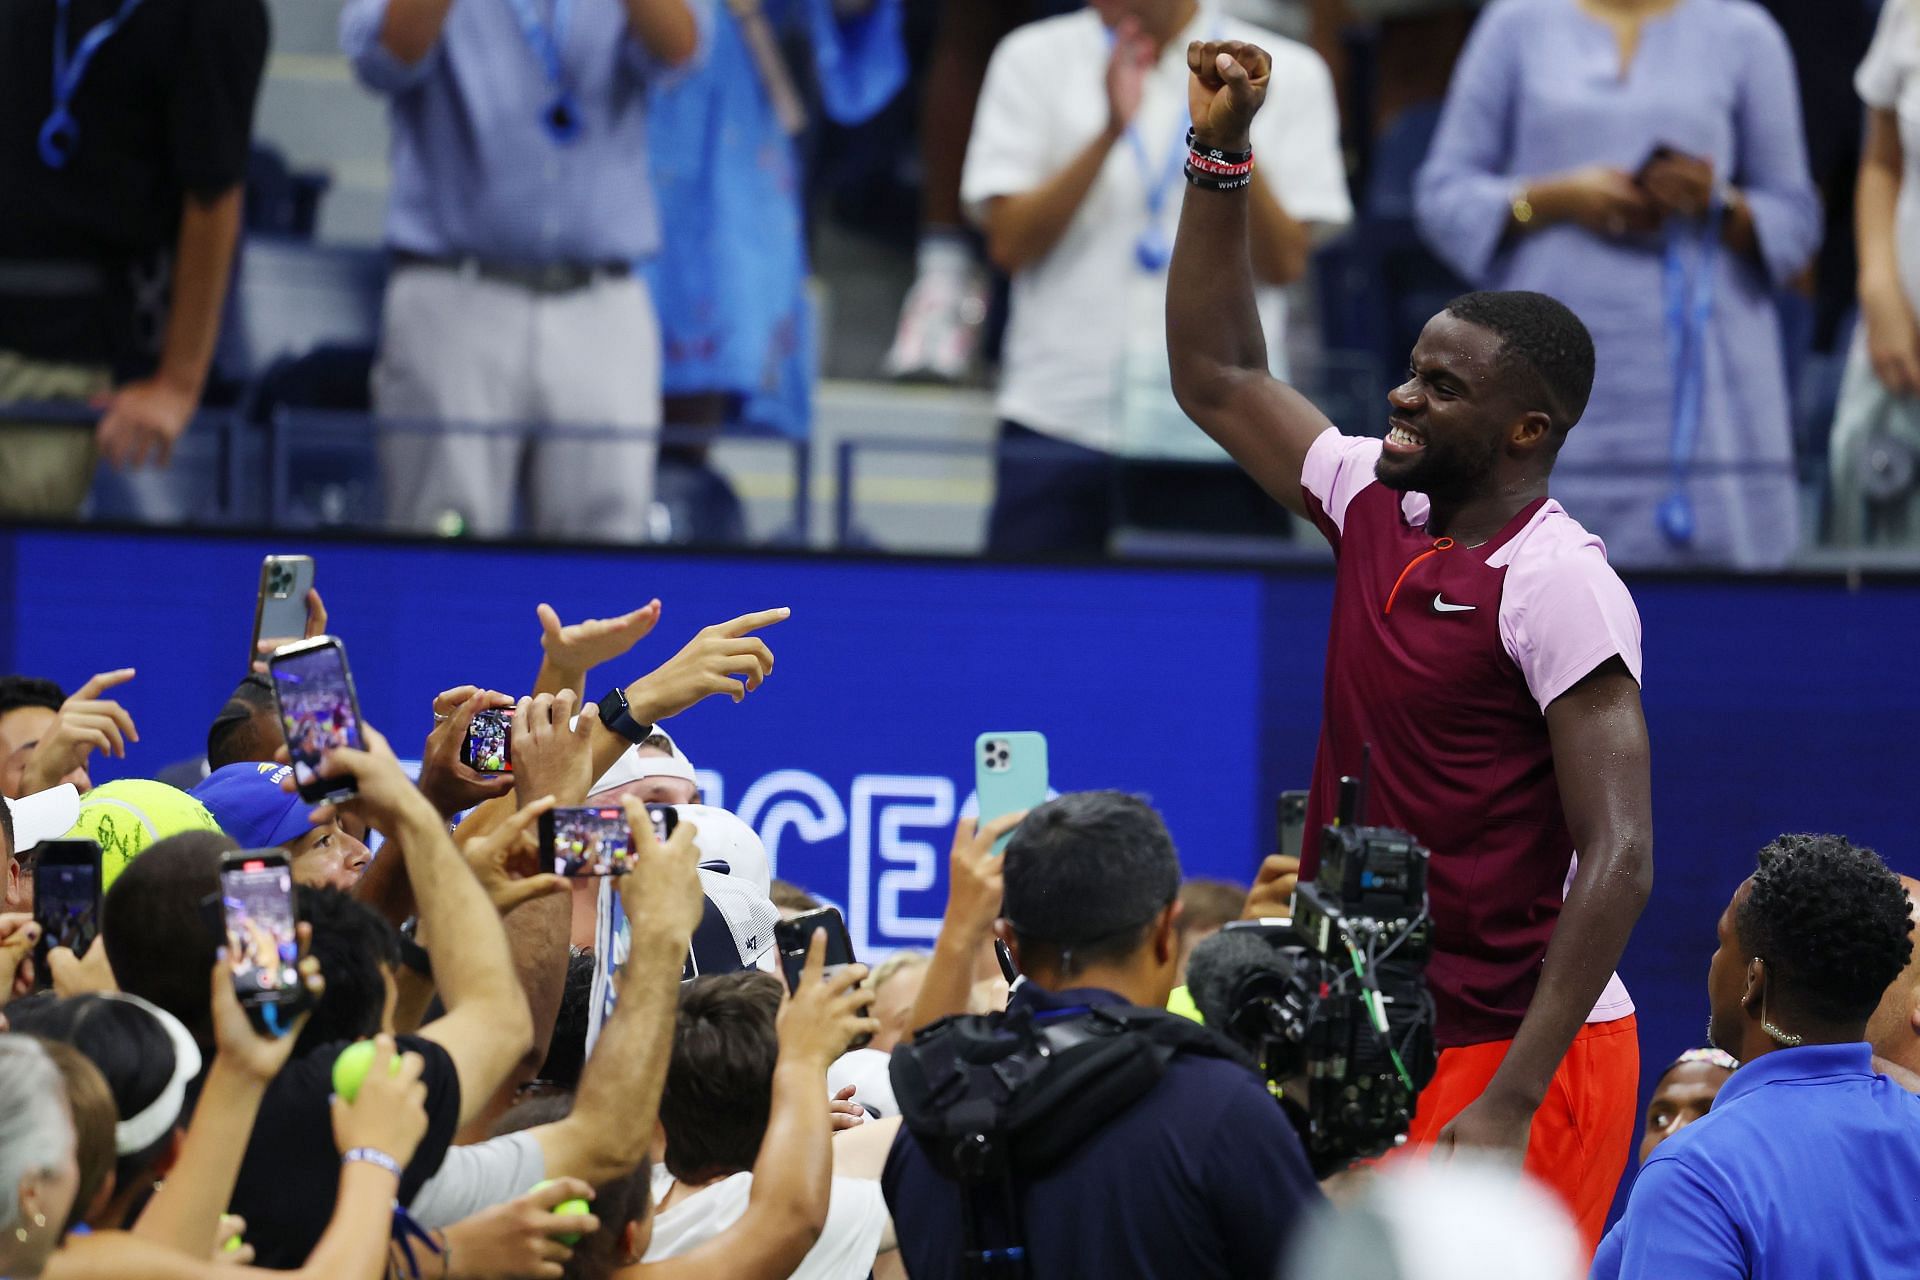 Tiafoe at the 2022 US Open - Day 8